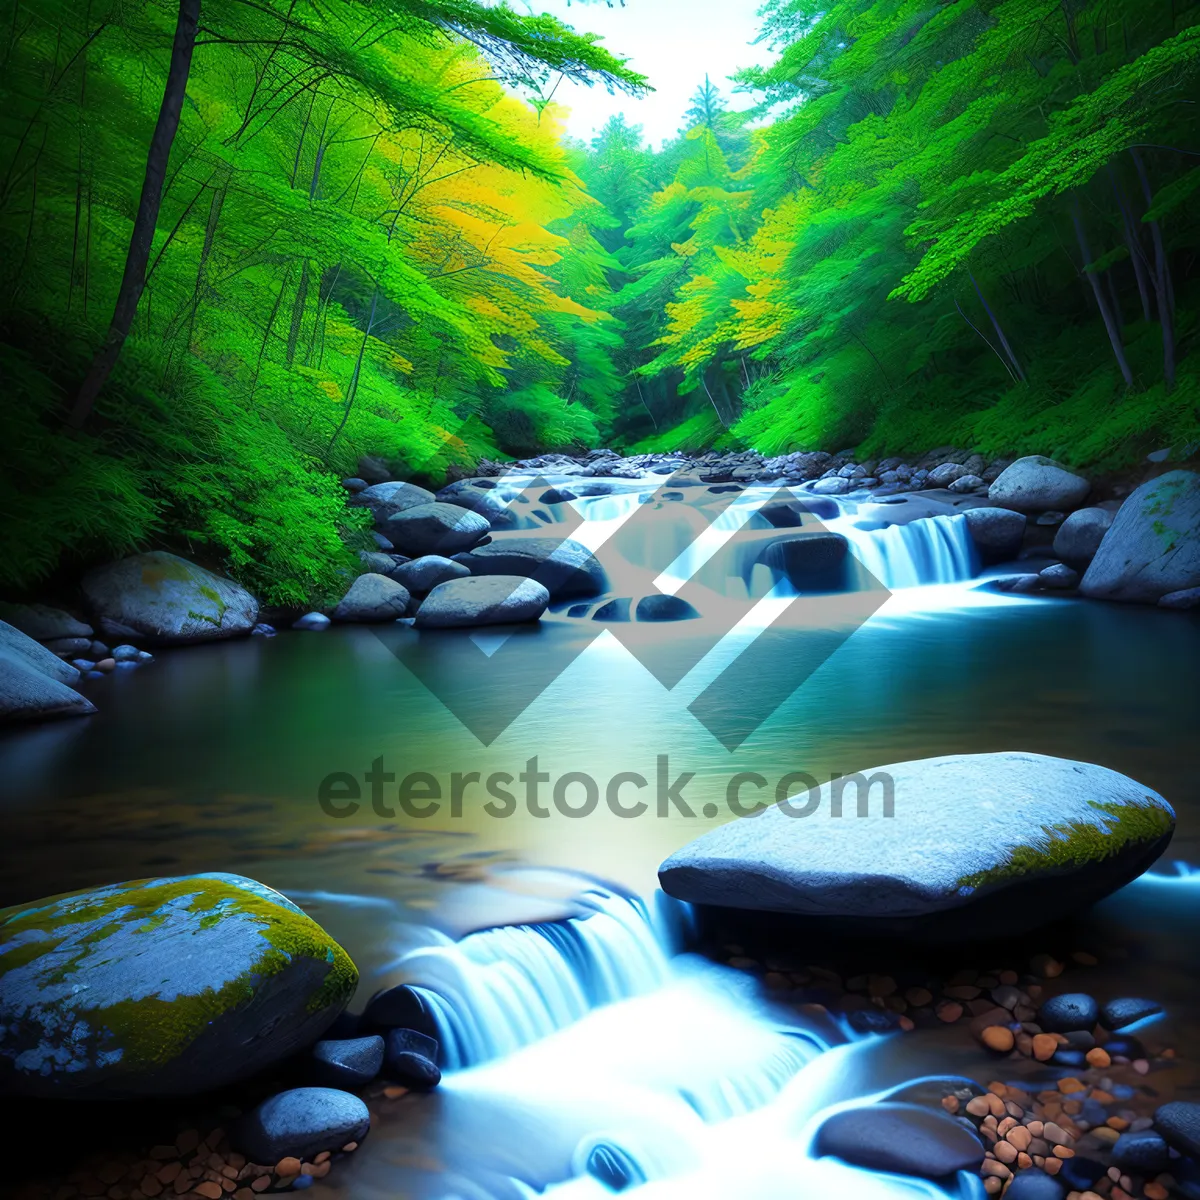 Picture of Serene Waterfall in Enchanting Forest Landscape